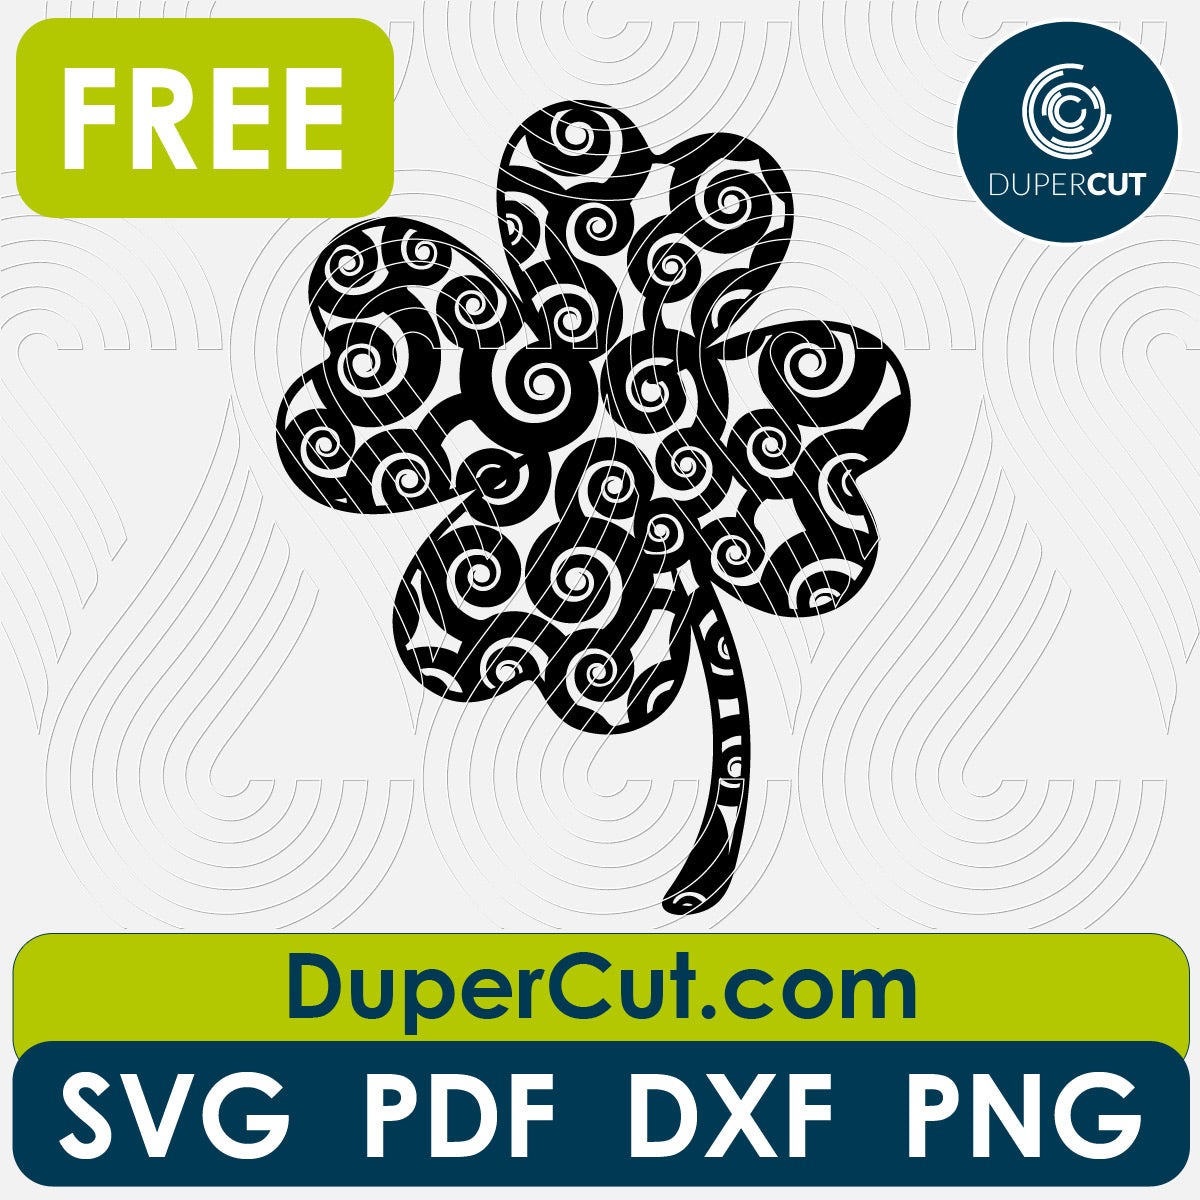 Clover curly pattern, FREE cutting template SVG PNG DXF files for Glowforge, Cricut, Silhouette, CNC laser router by DuperCut.com